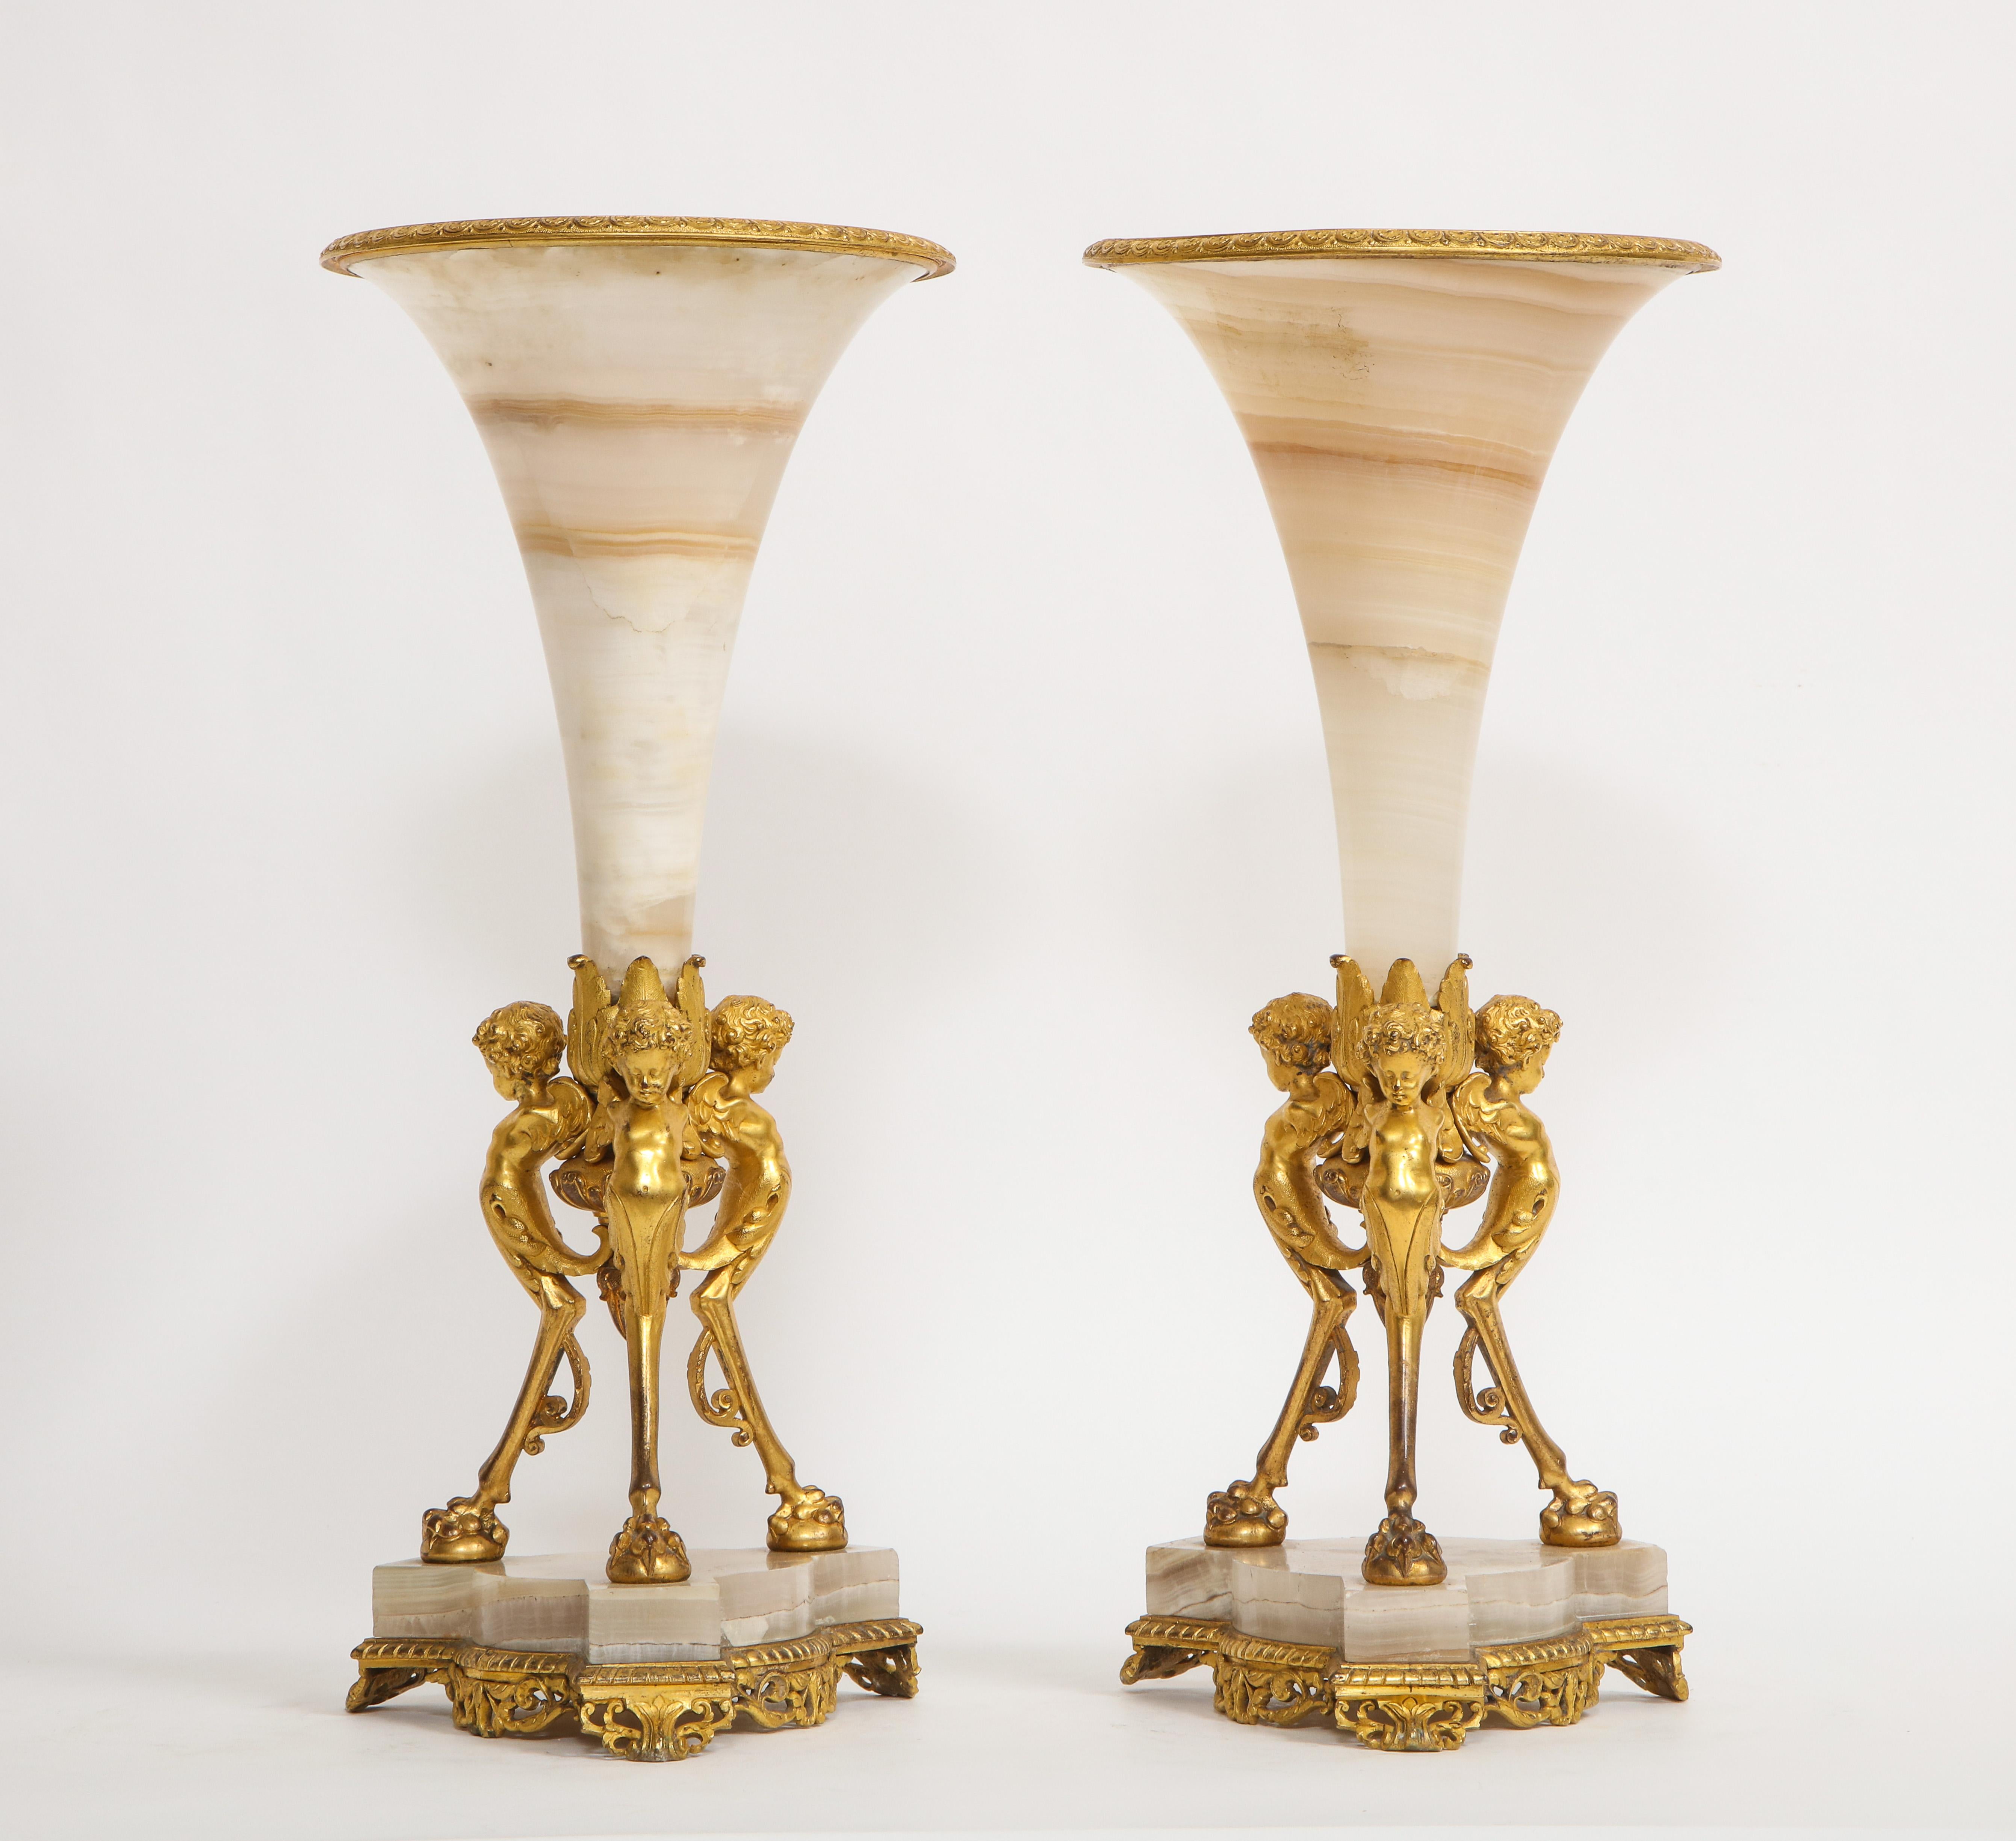 Gilt Pair of French 19th Century Figural Dore Bronze Mntd. Alabaster Trumpet Vases For Sale